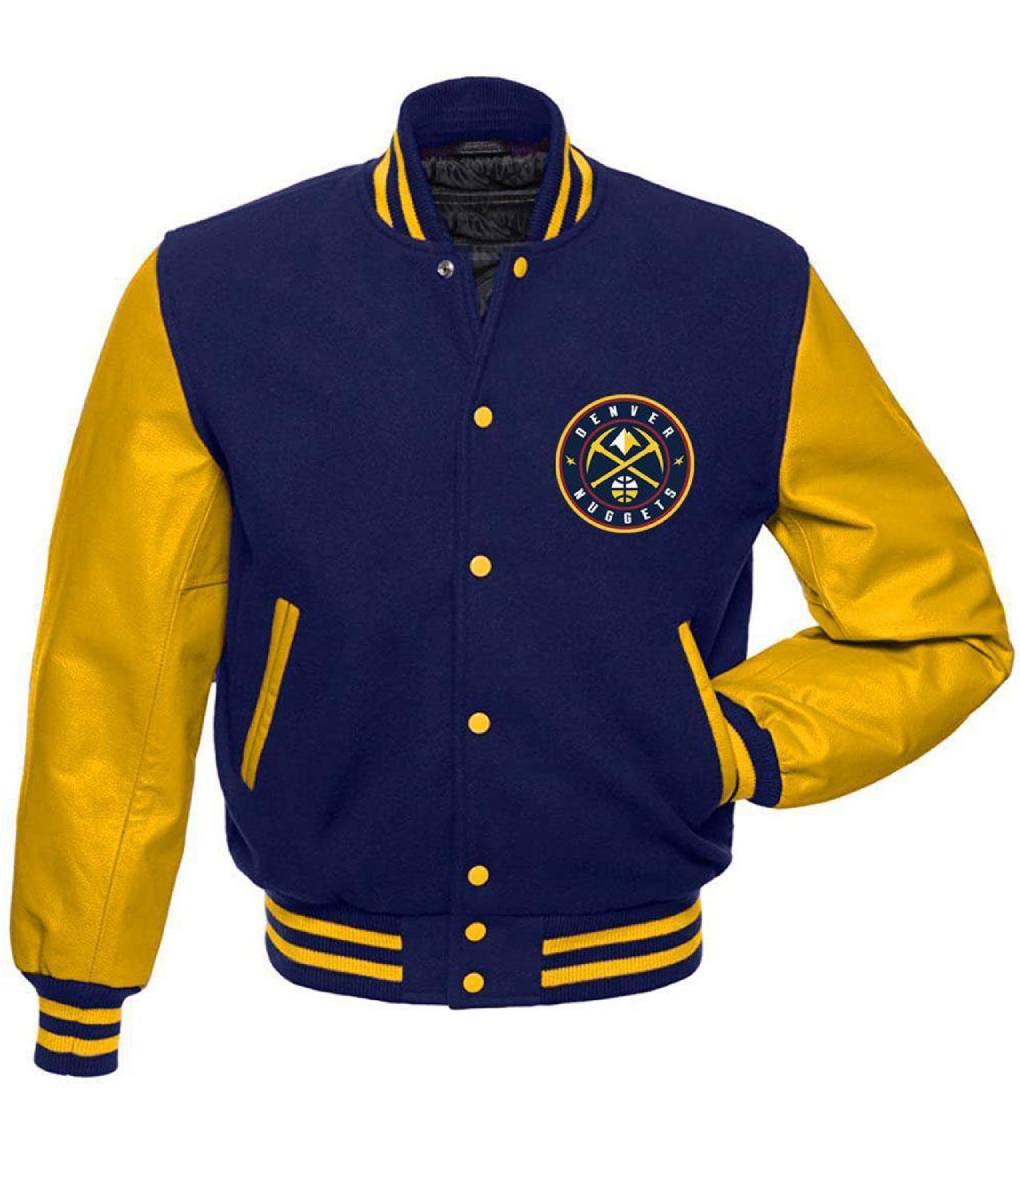 Indiana Pacers Varsity Blue and Yellow Jacket